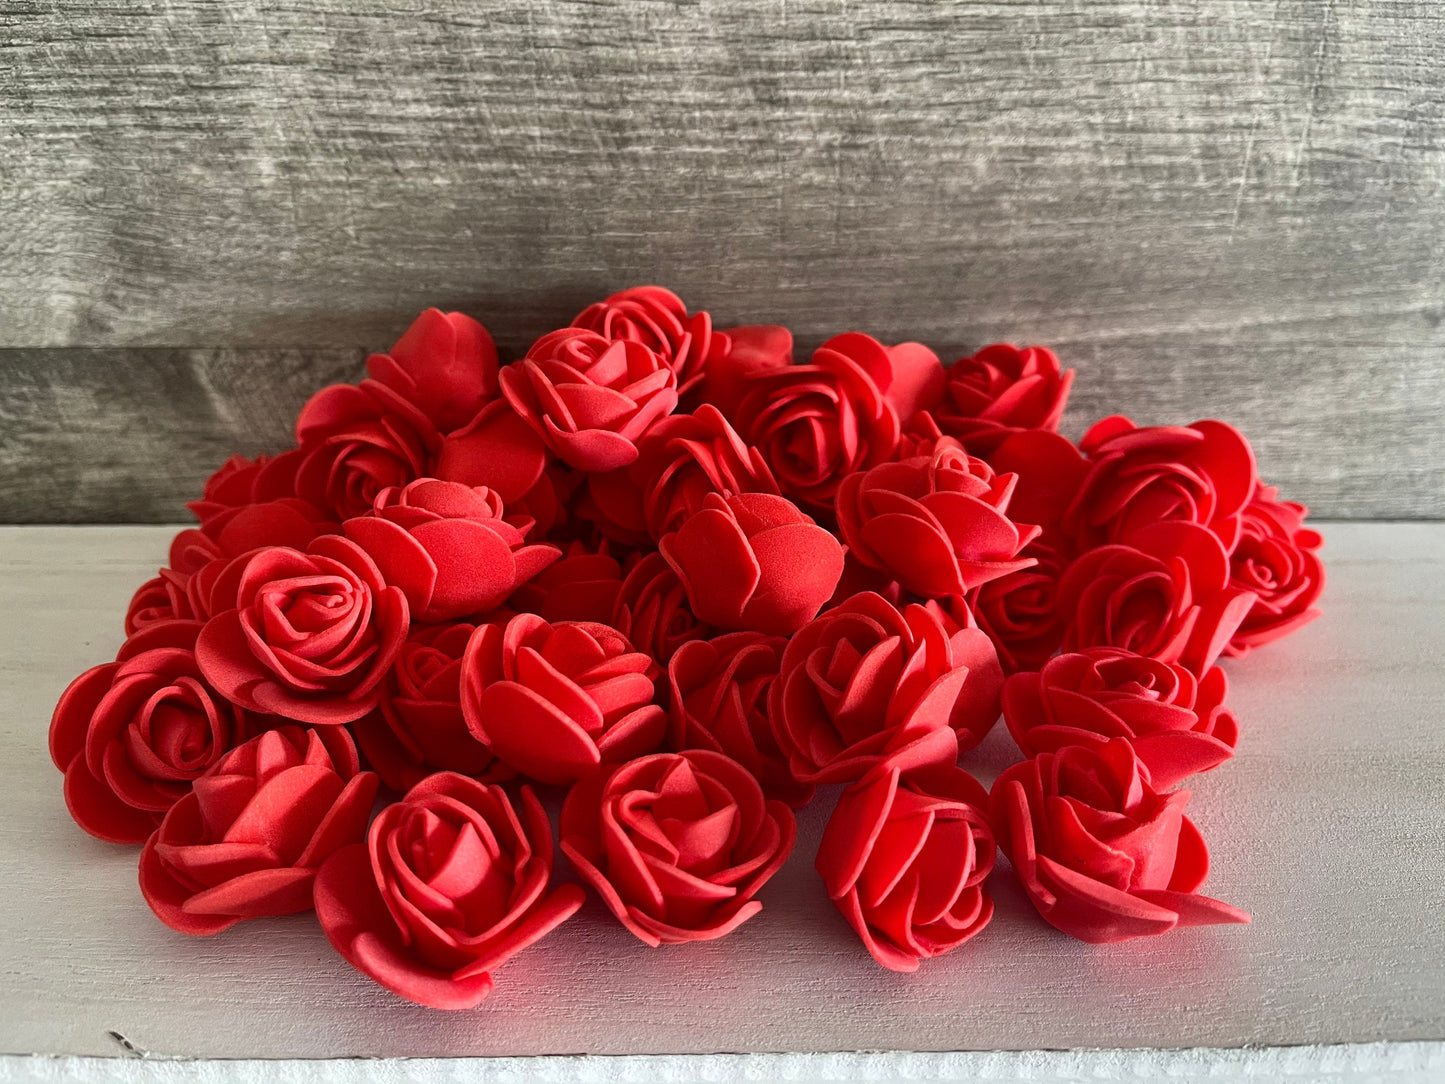 100 Pieces — 3cm Bulk Wholesale Foam Flowers for Crafts, Wedding, Shadowboxes, Gifts — Multiple Colors — Same Day Shipping